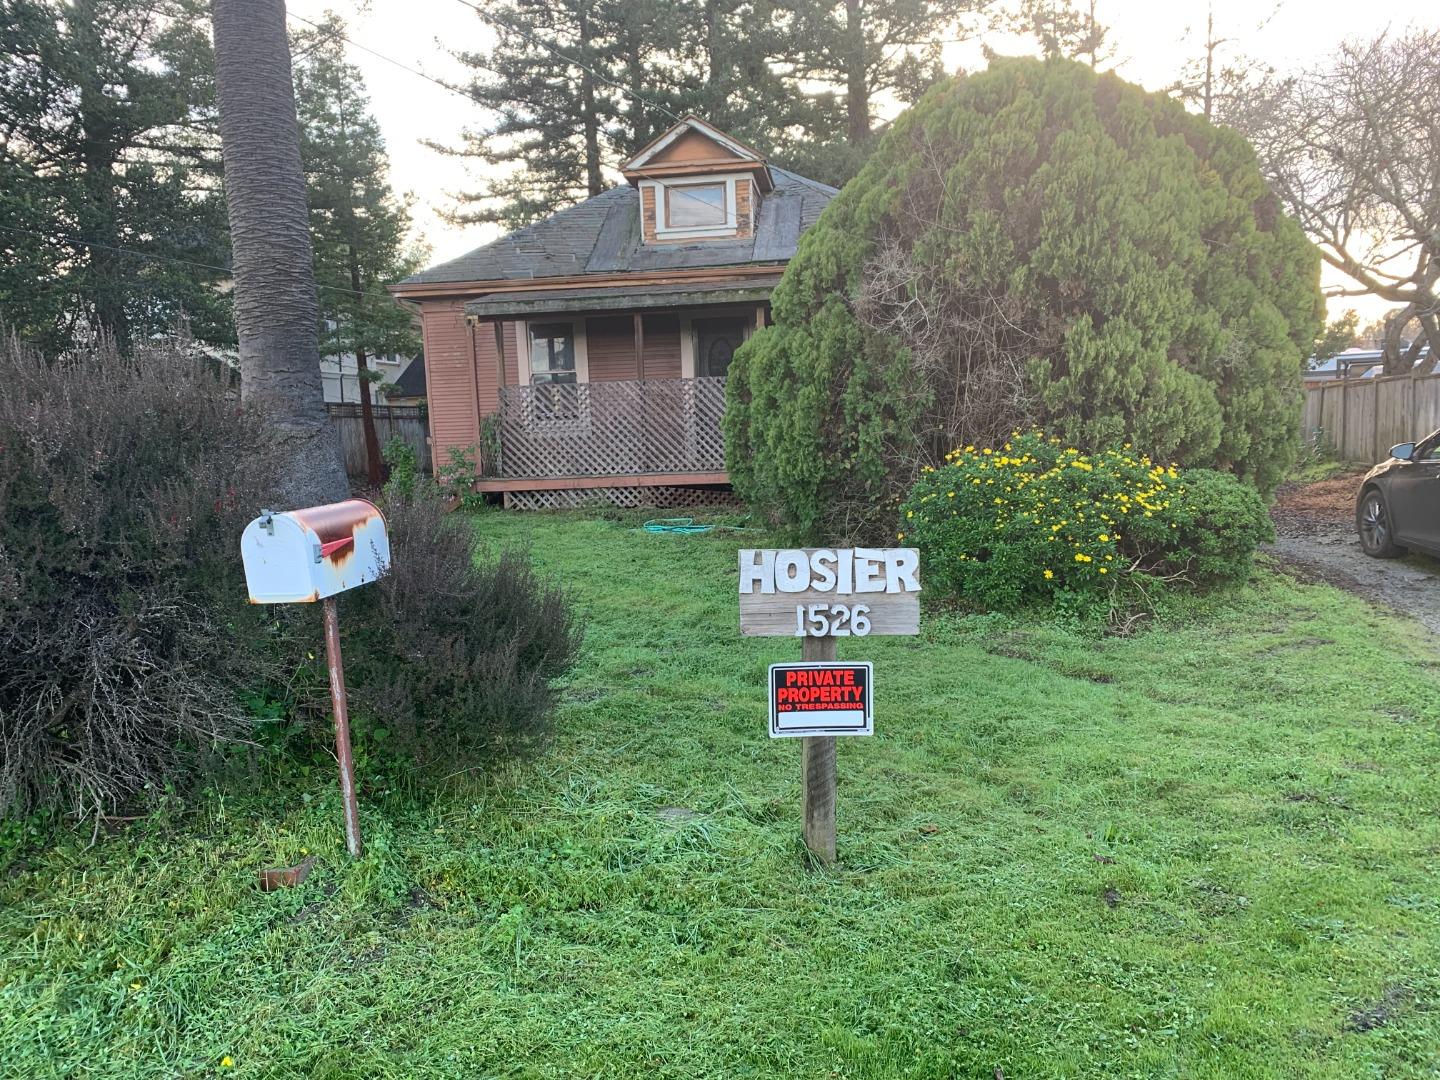 a front view of a house with a yard and a street sign